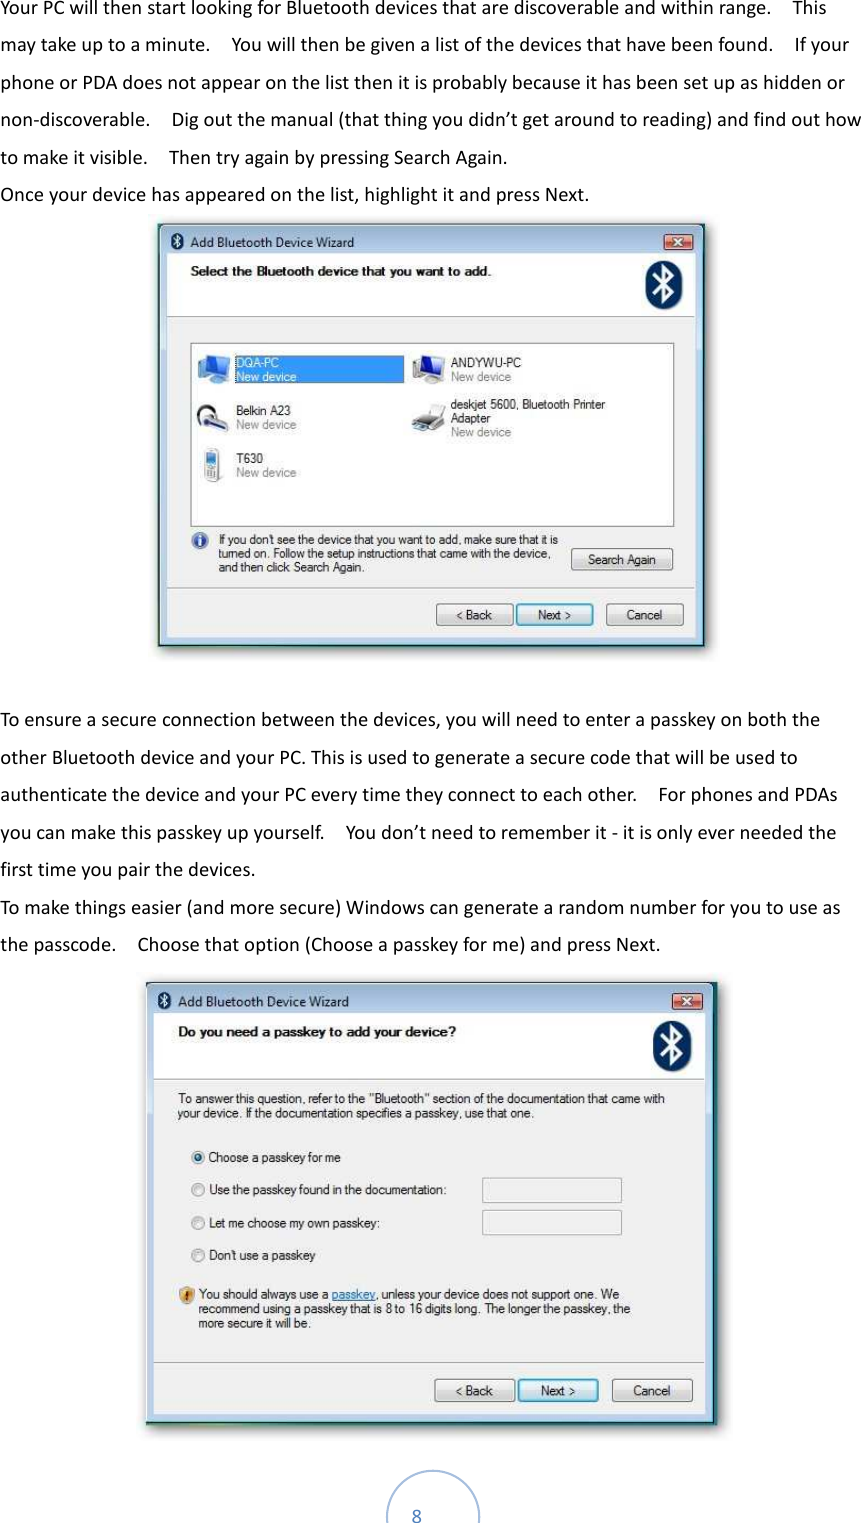  8 Your PC will then start looking for Bluetooth devices that are discoverable and within range.    This may take up to a minute.    You will then be given a list of the devices that have been found.    If your phone or PDA does not appear on the list then it is probably because it has been set up as hidden or non-discoverable.    Dig out the manual (that thing you didn’t get around to reading) and find out how to make it visible.    Then try again by pressing Search Again.   Once your device has appeared on the list, highlight it and press Next.     To ensure a secure connection between the devices, you will need to enter a passkey on both the other Bluetooth device and your PC. This is used to generate a secure code that will be used to authenticate the device and your PC every time they connect to each other.    For phones and PDAs you can make this passkey up yourself.    You don’t need to remember it - it is only ever needed the first time you pair the devices.   To make things easier (and more secure) Windows can generate a random number for you to use as the passcode.    Choose that option (Choose a passkey for me) and press Next.    